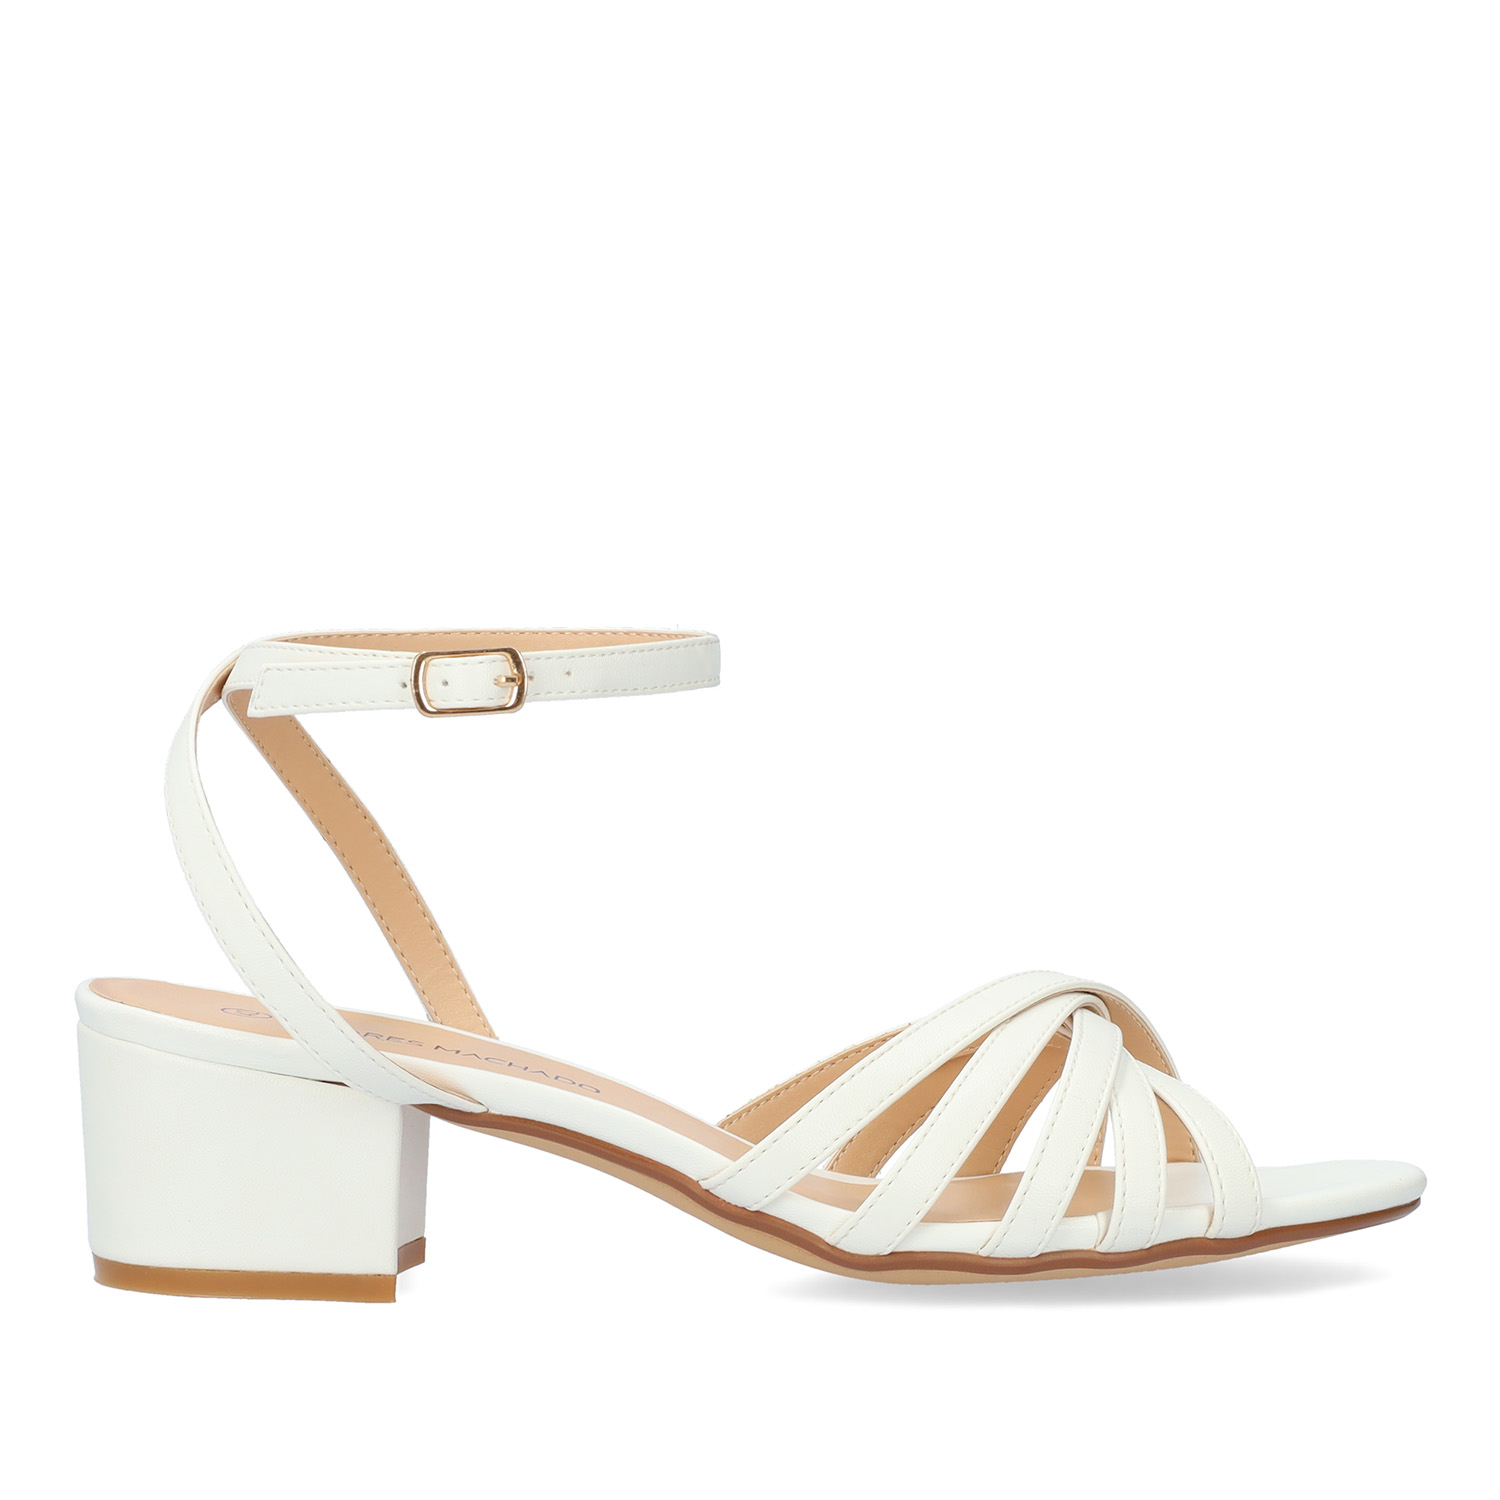 Squared heel sandal in white soft material 